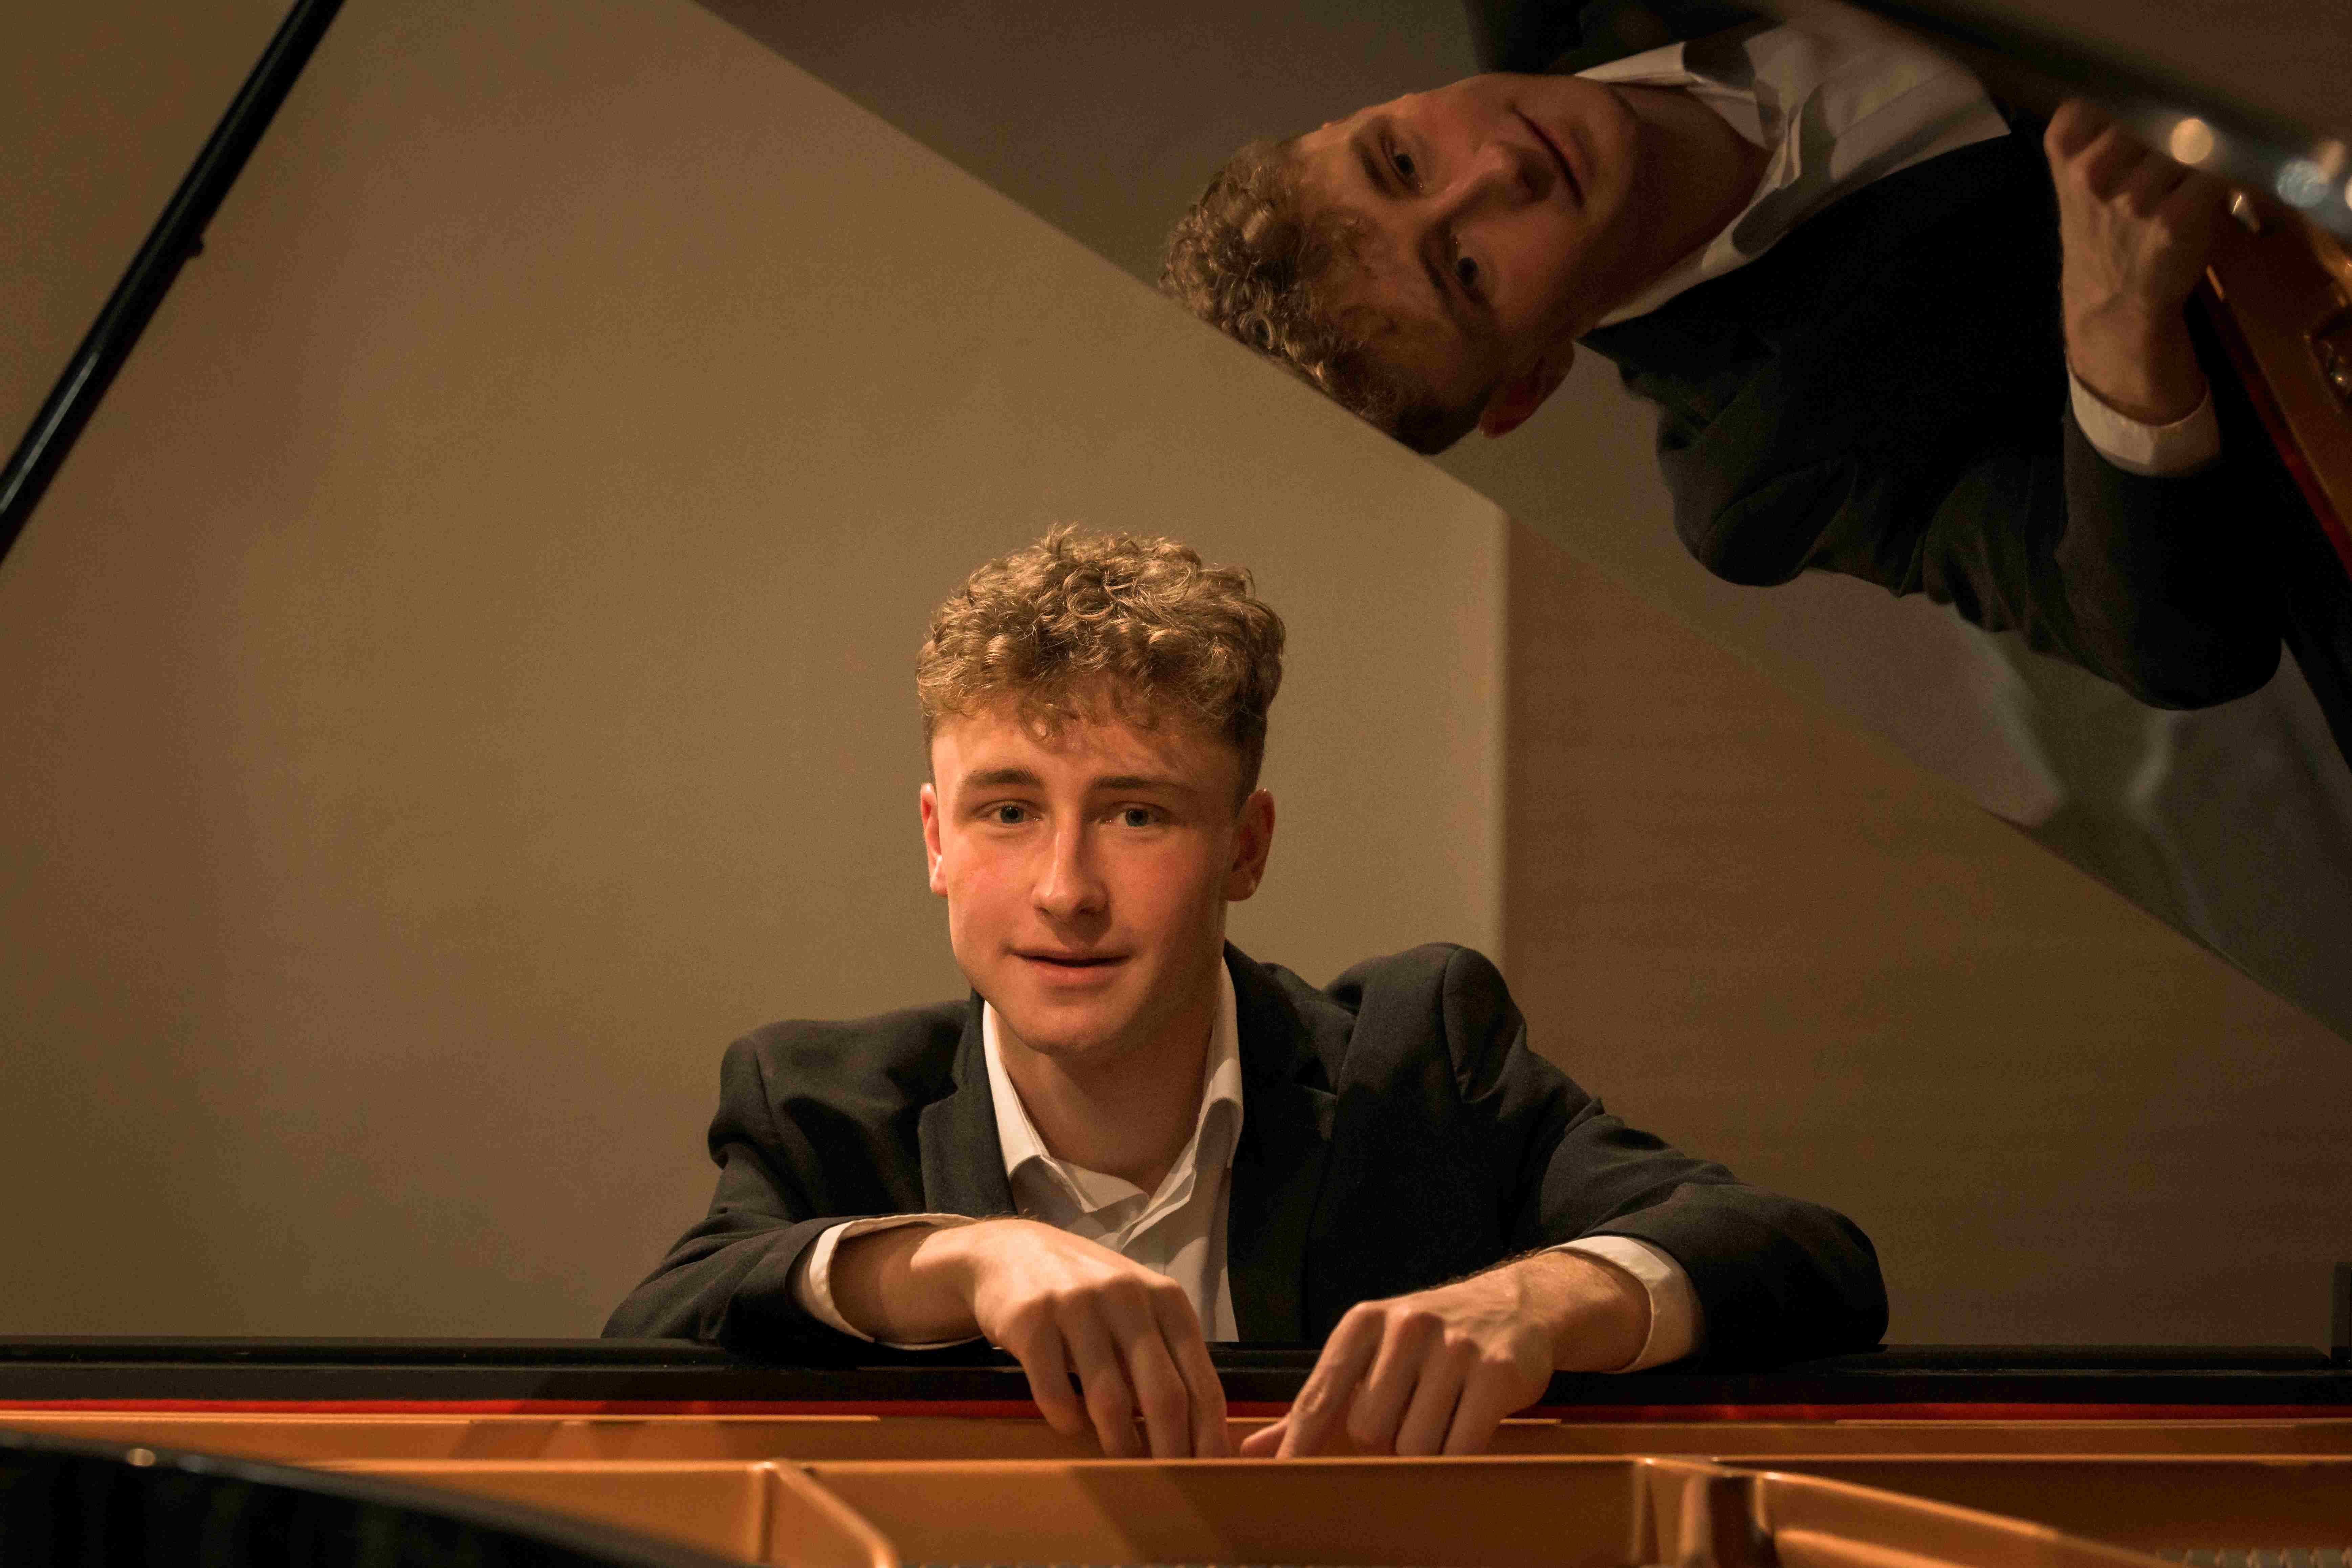 Starring role at festival will be bittersweet experience for young piano virtuoso Ellis